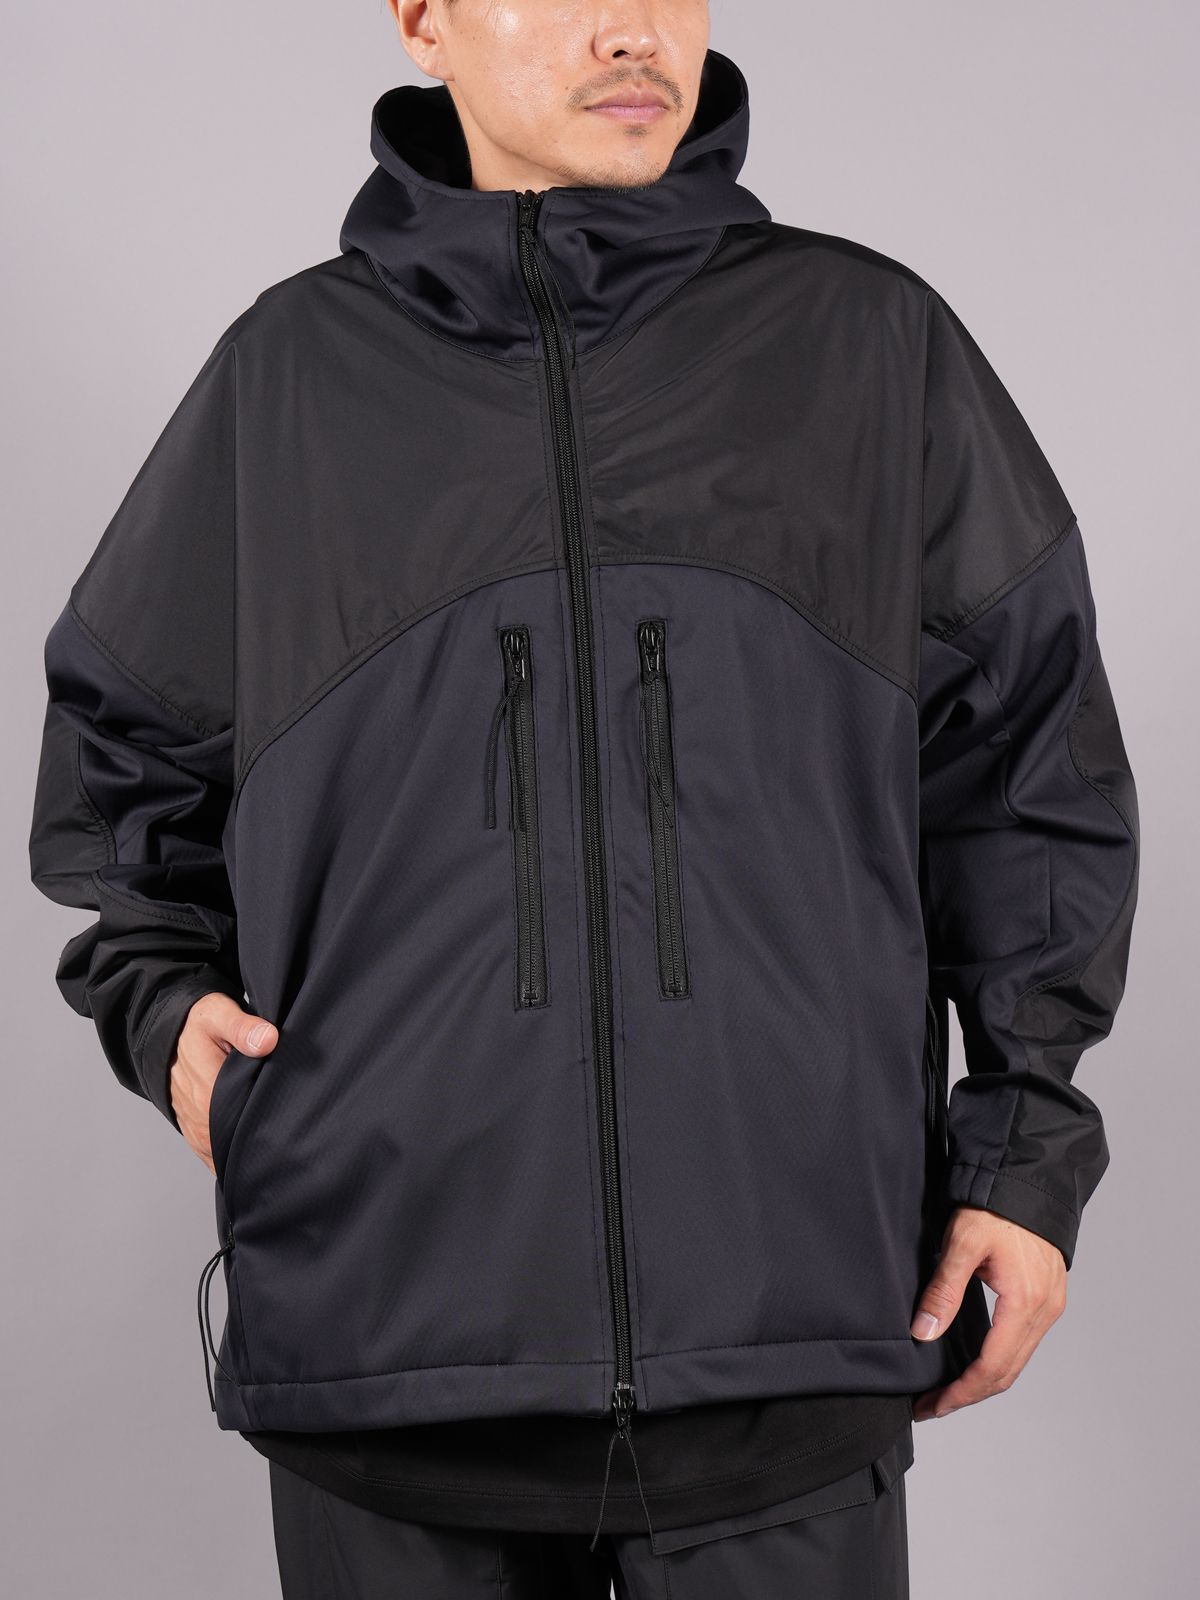 D-VEC - 【ラスト1点】 WINDSTOPPER PRODUCTS BY GORE-TEX LABS ...